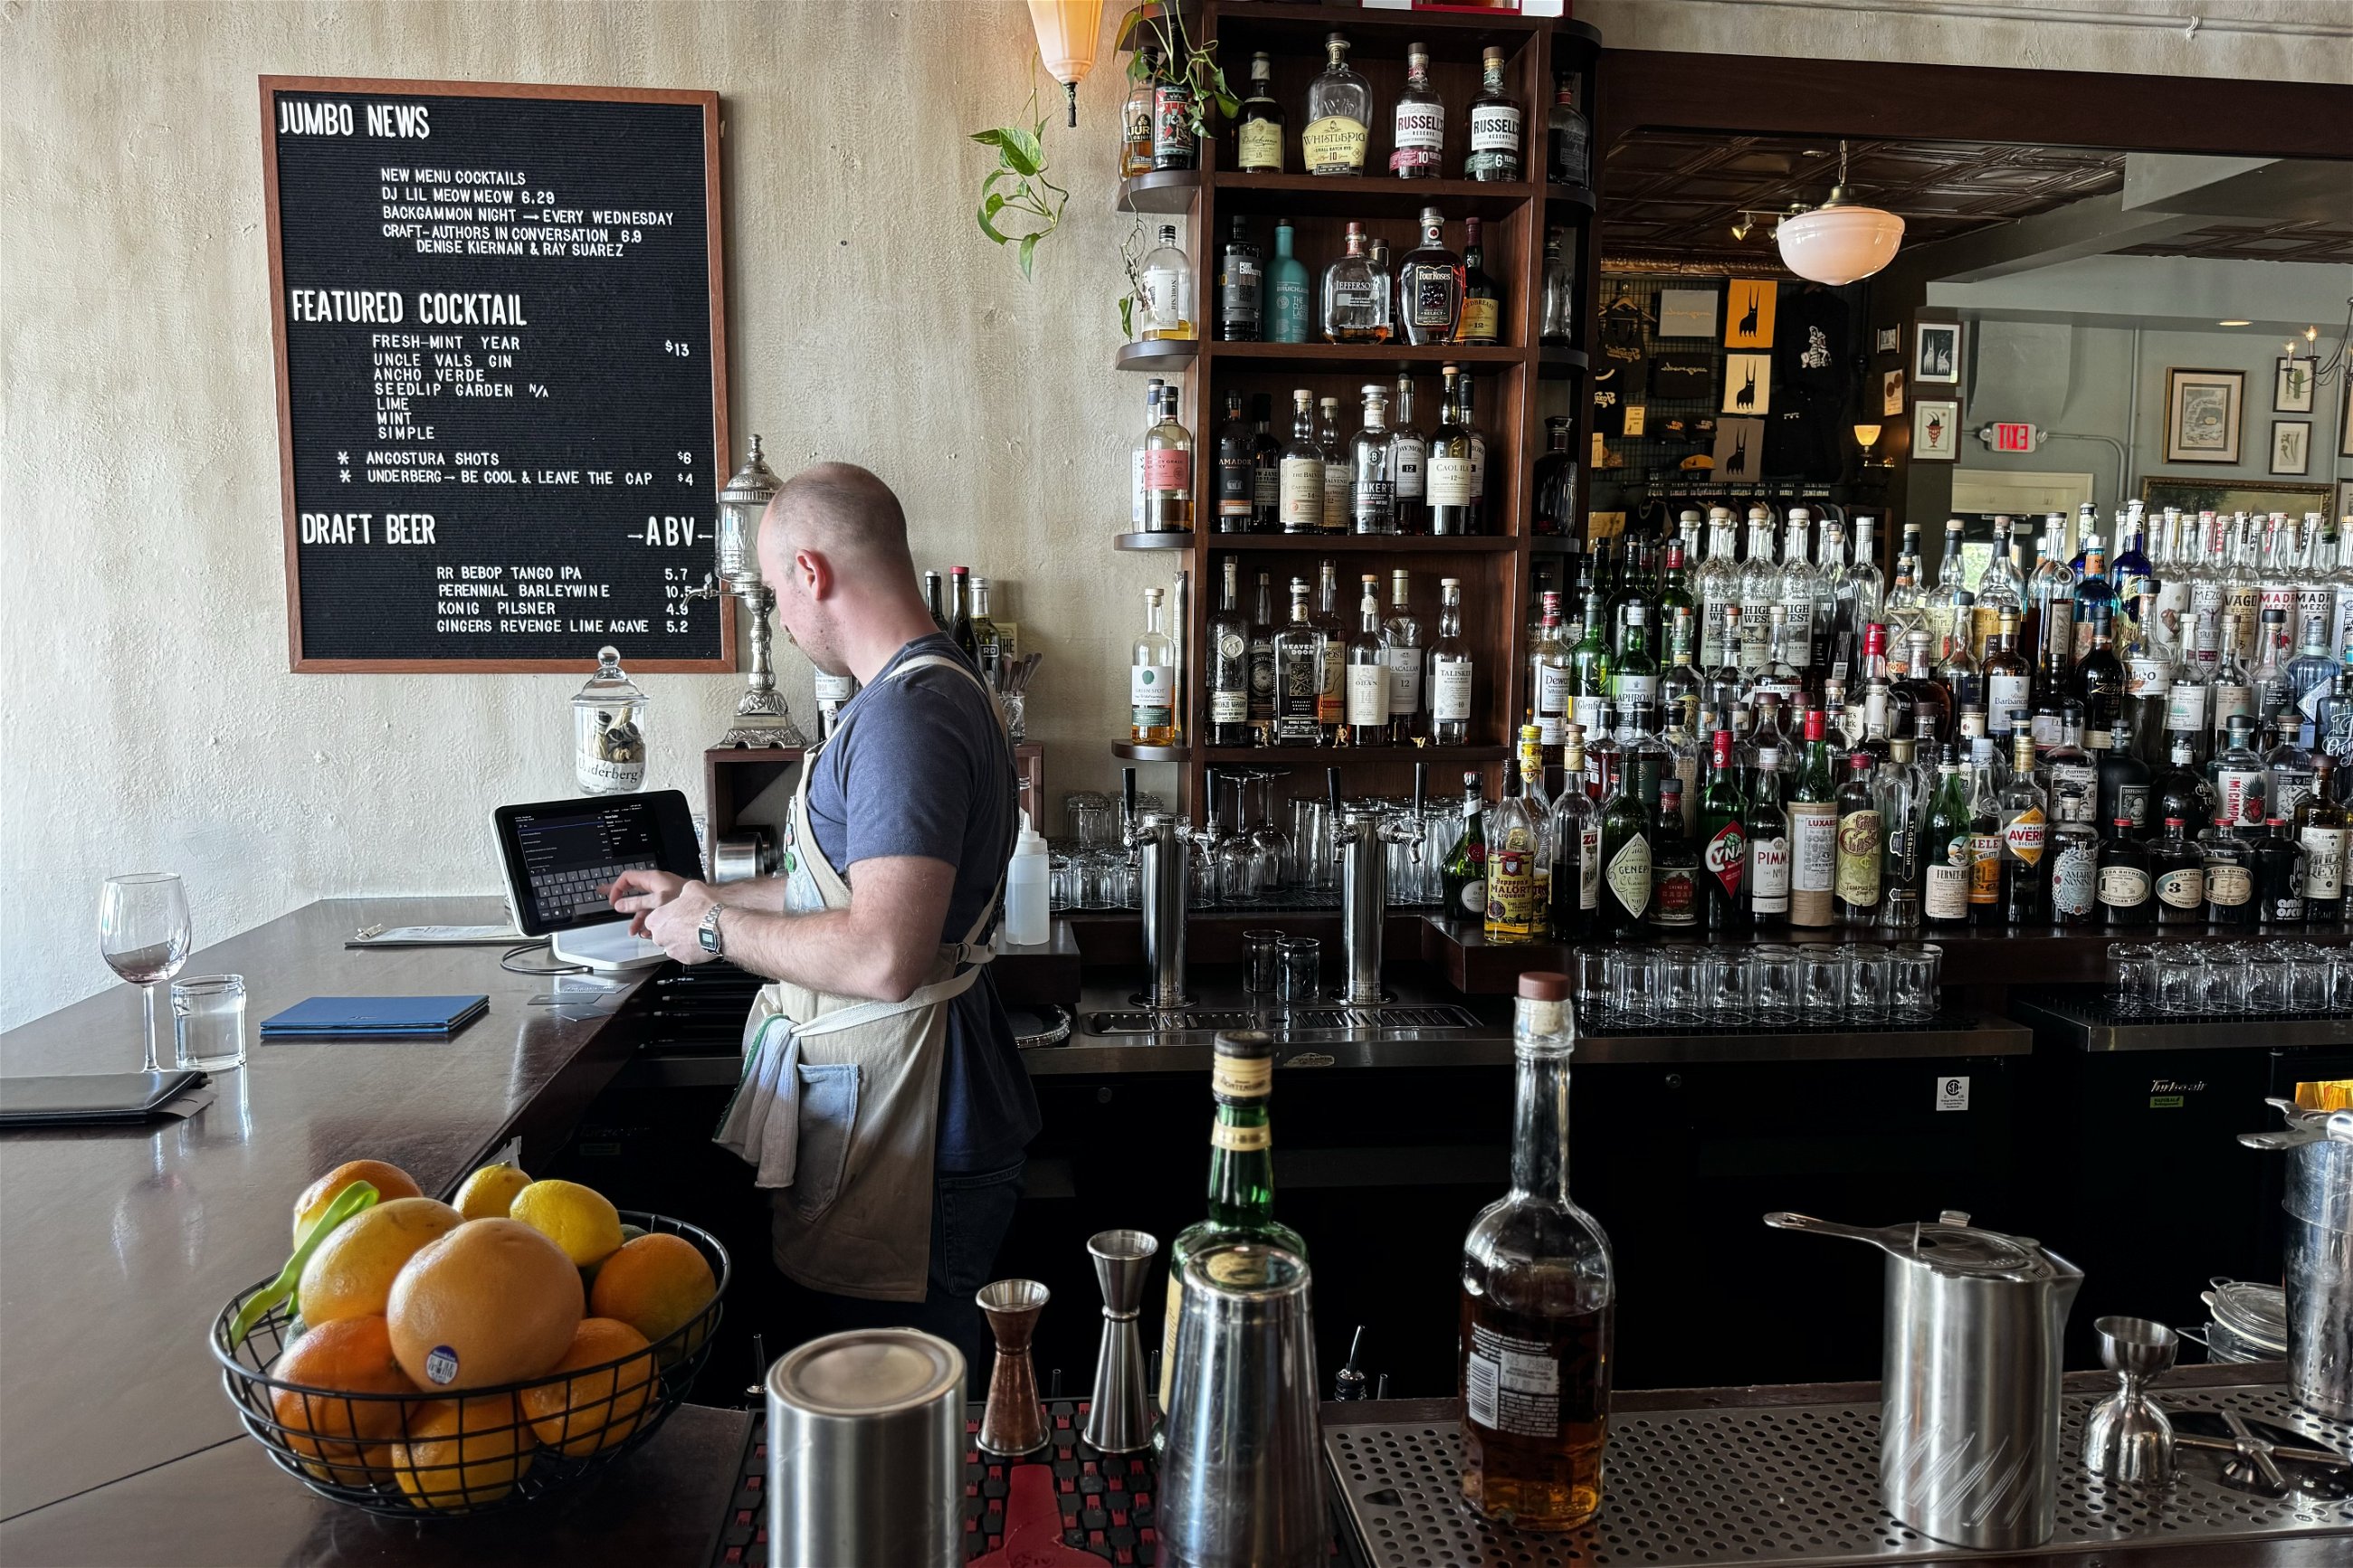 Man working on an iPad at a bar counter, surrounded by an extensive selection of spirits displayed on shelves, with a blackboard listing featured cocktails and draft beers above him.